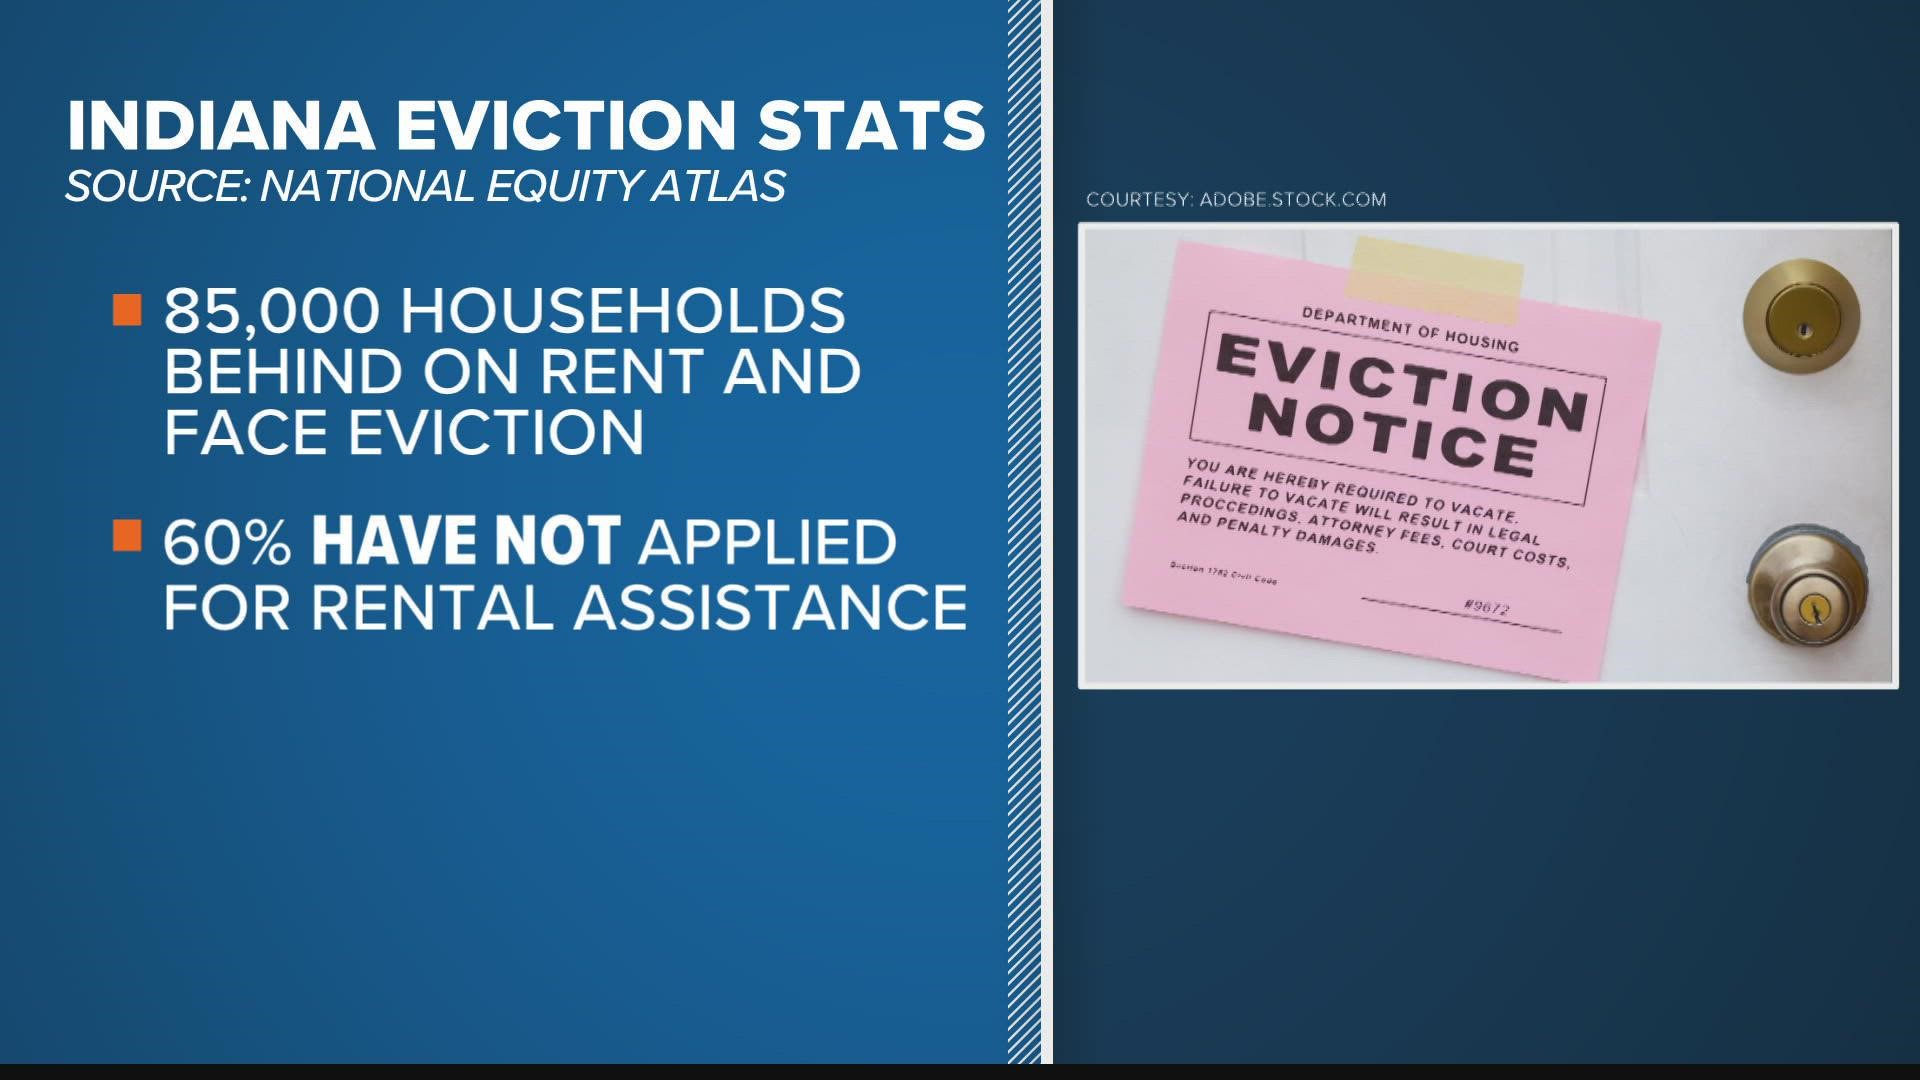 A statewide effort is underway to prevent evictions in the early stage.